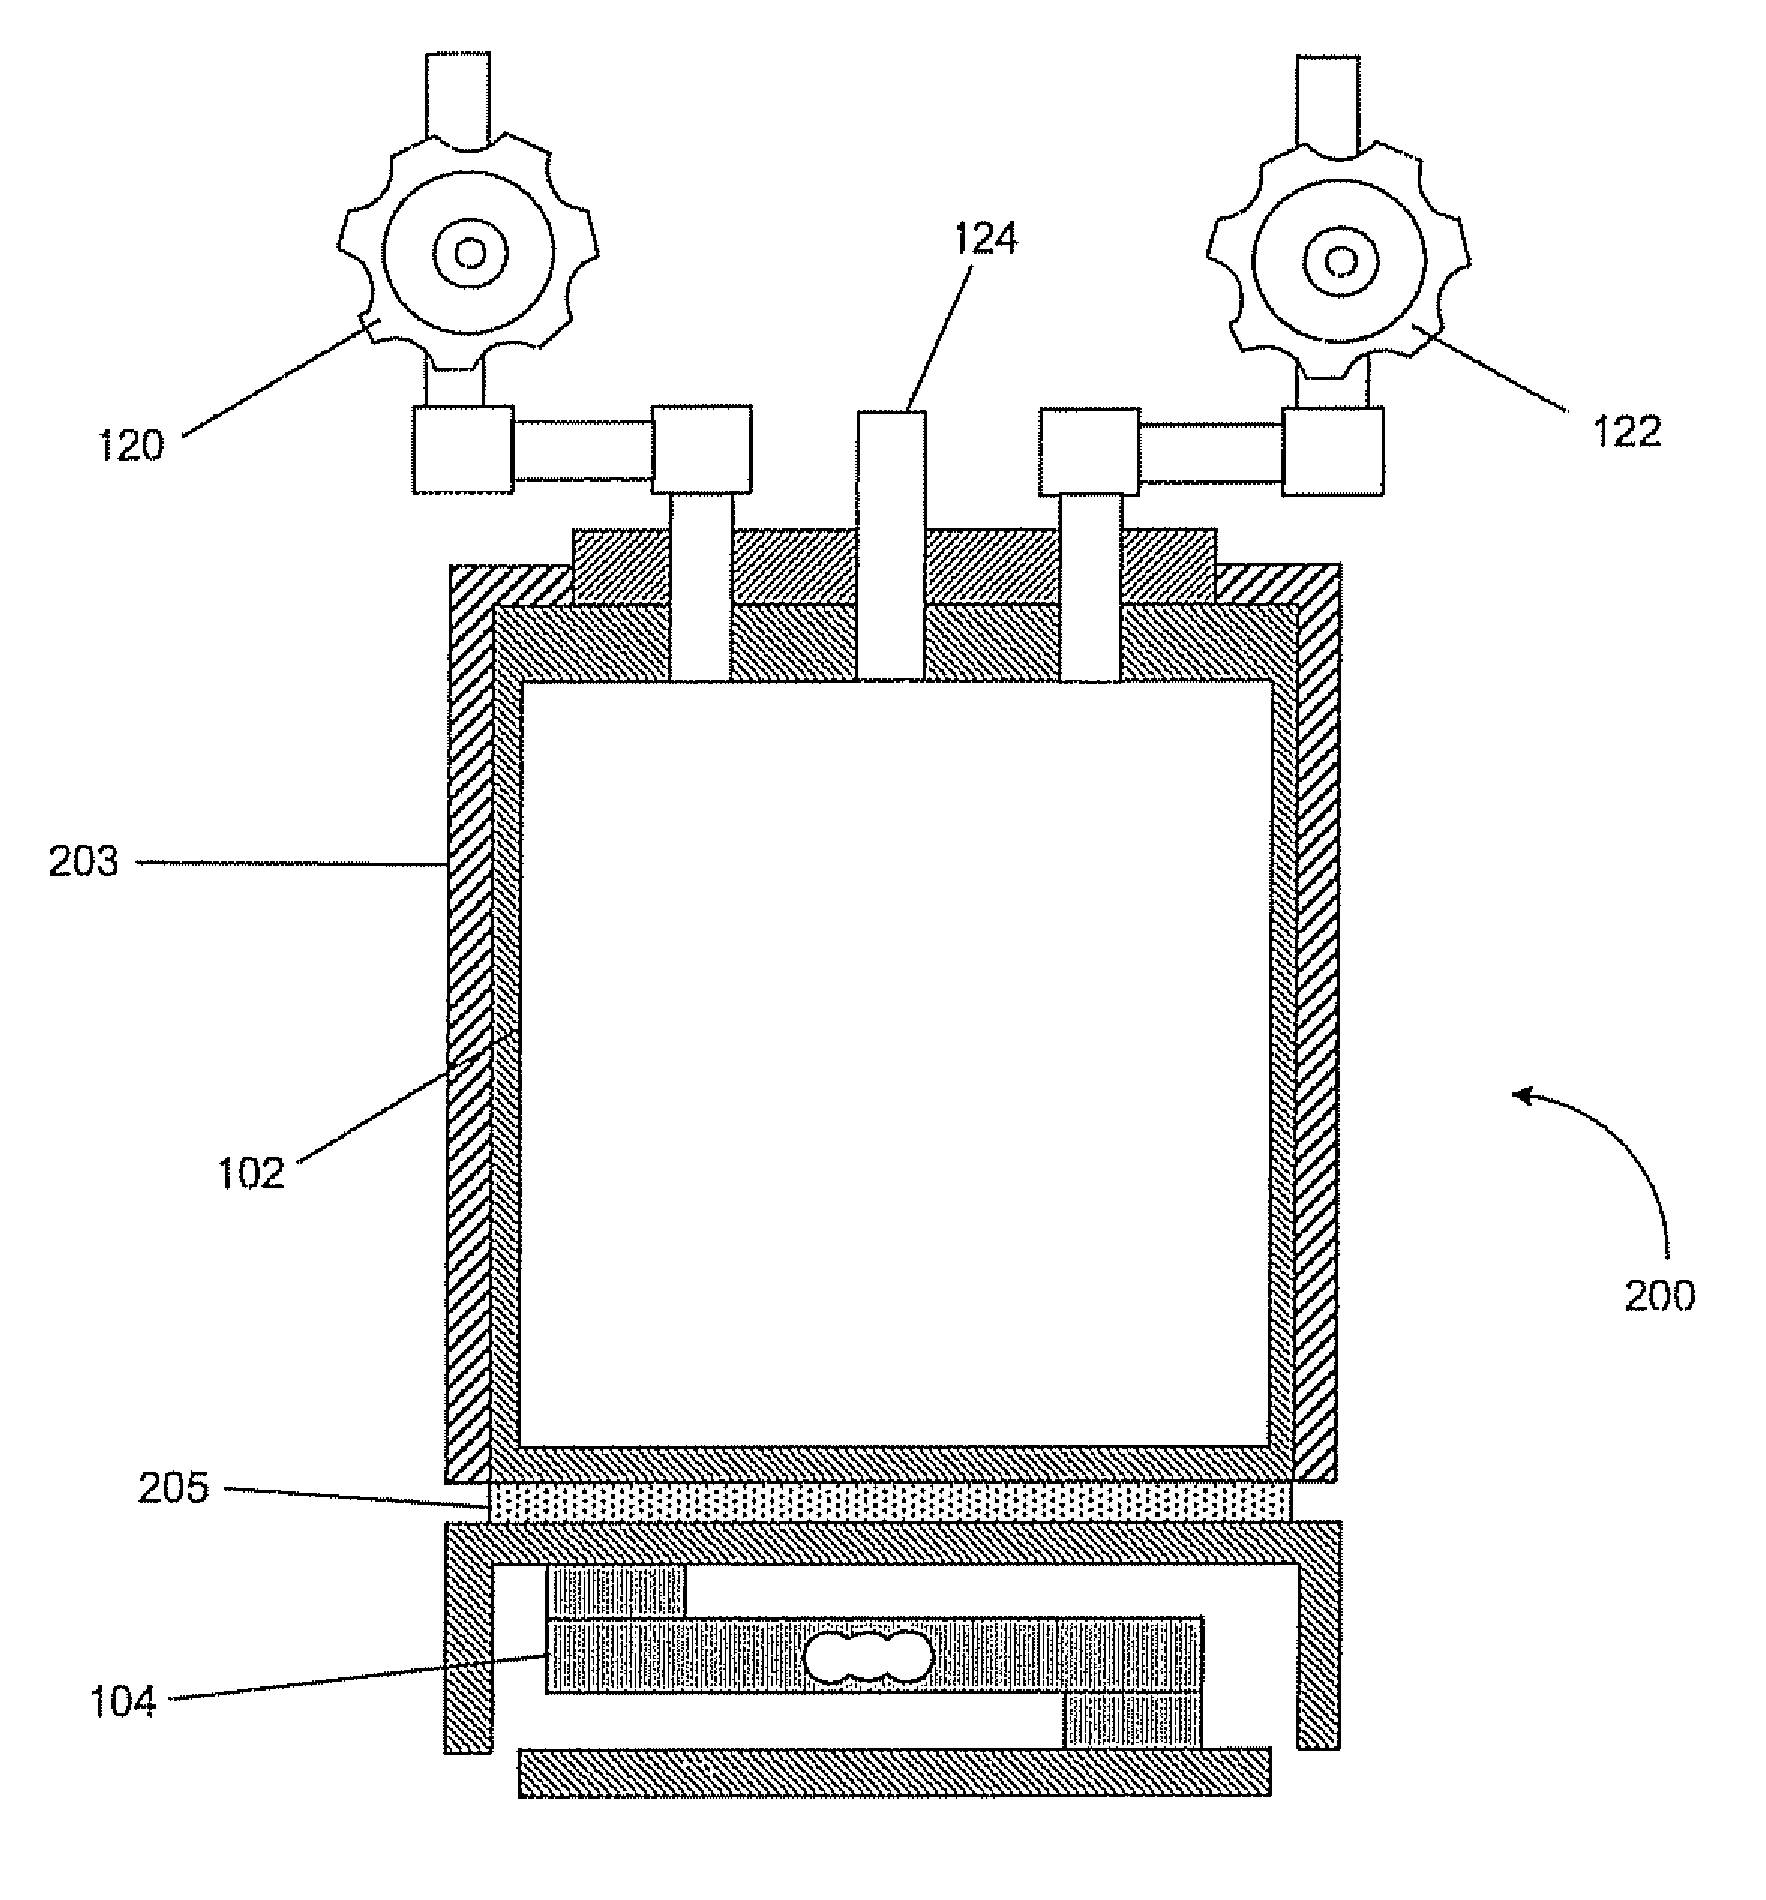 Chemical storage device with integrated load cell